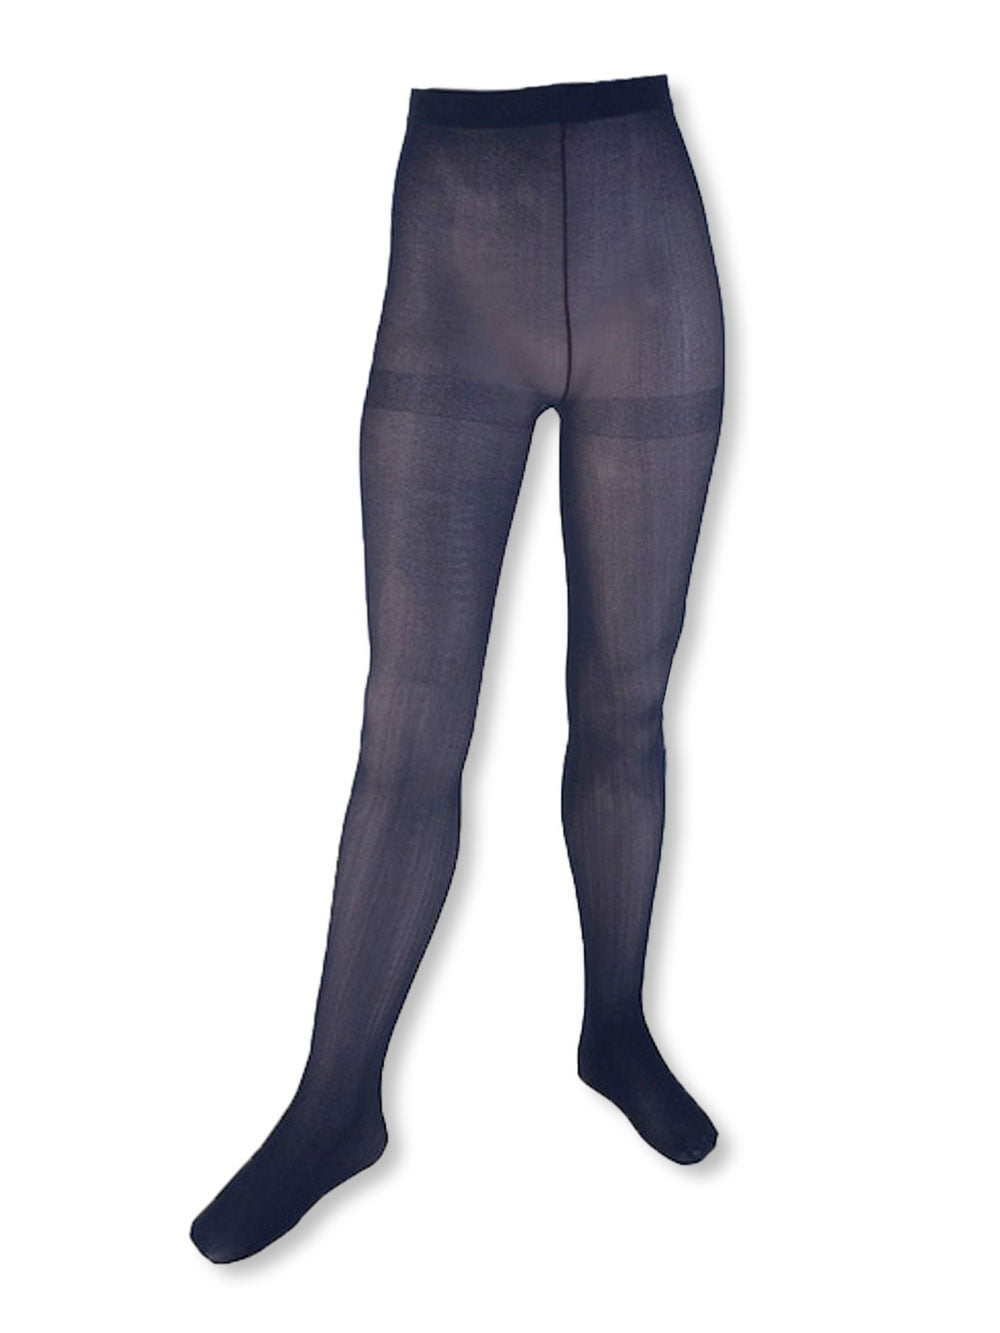 Fawn Opaque Footless Tights, Free Shipping Over $39.00